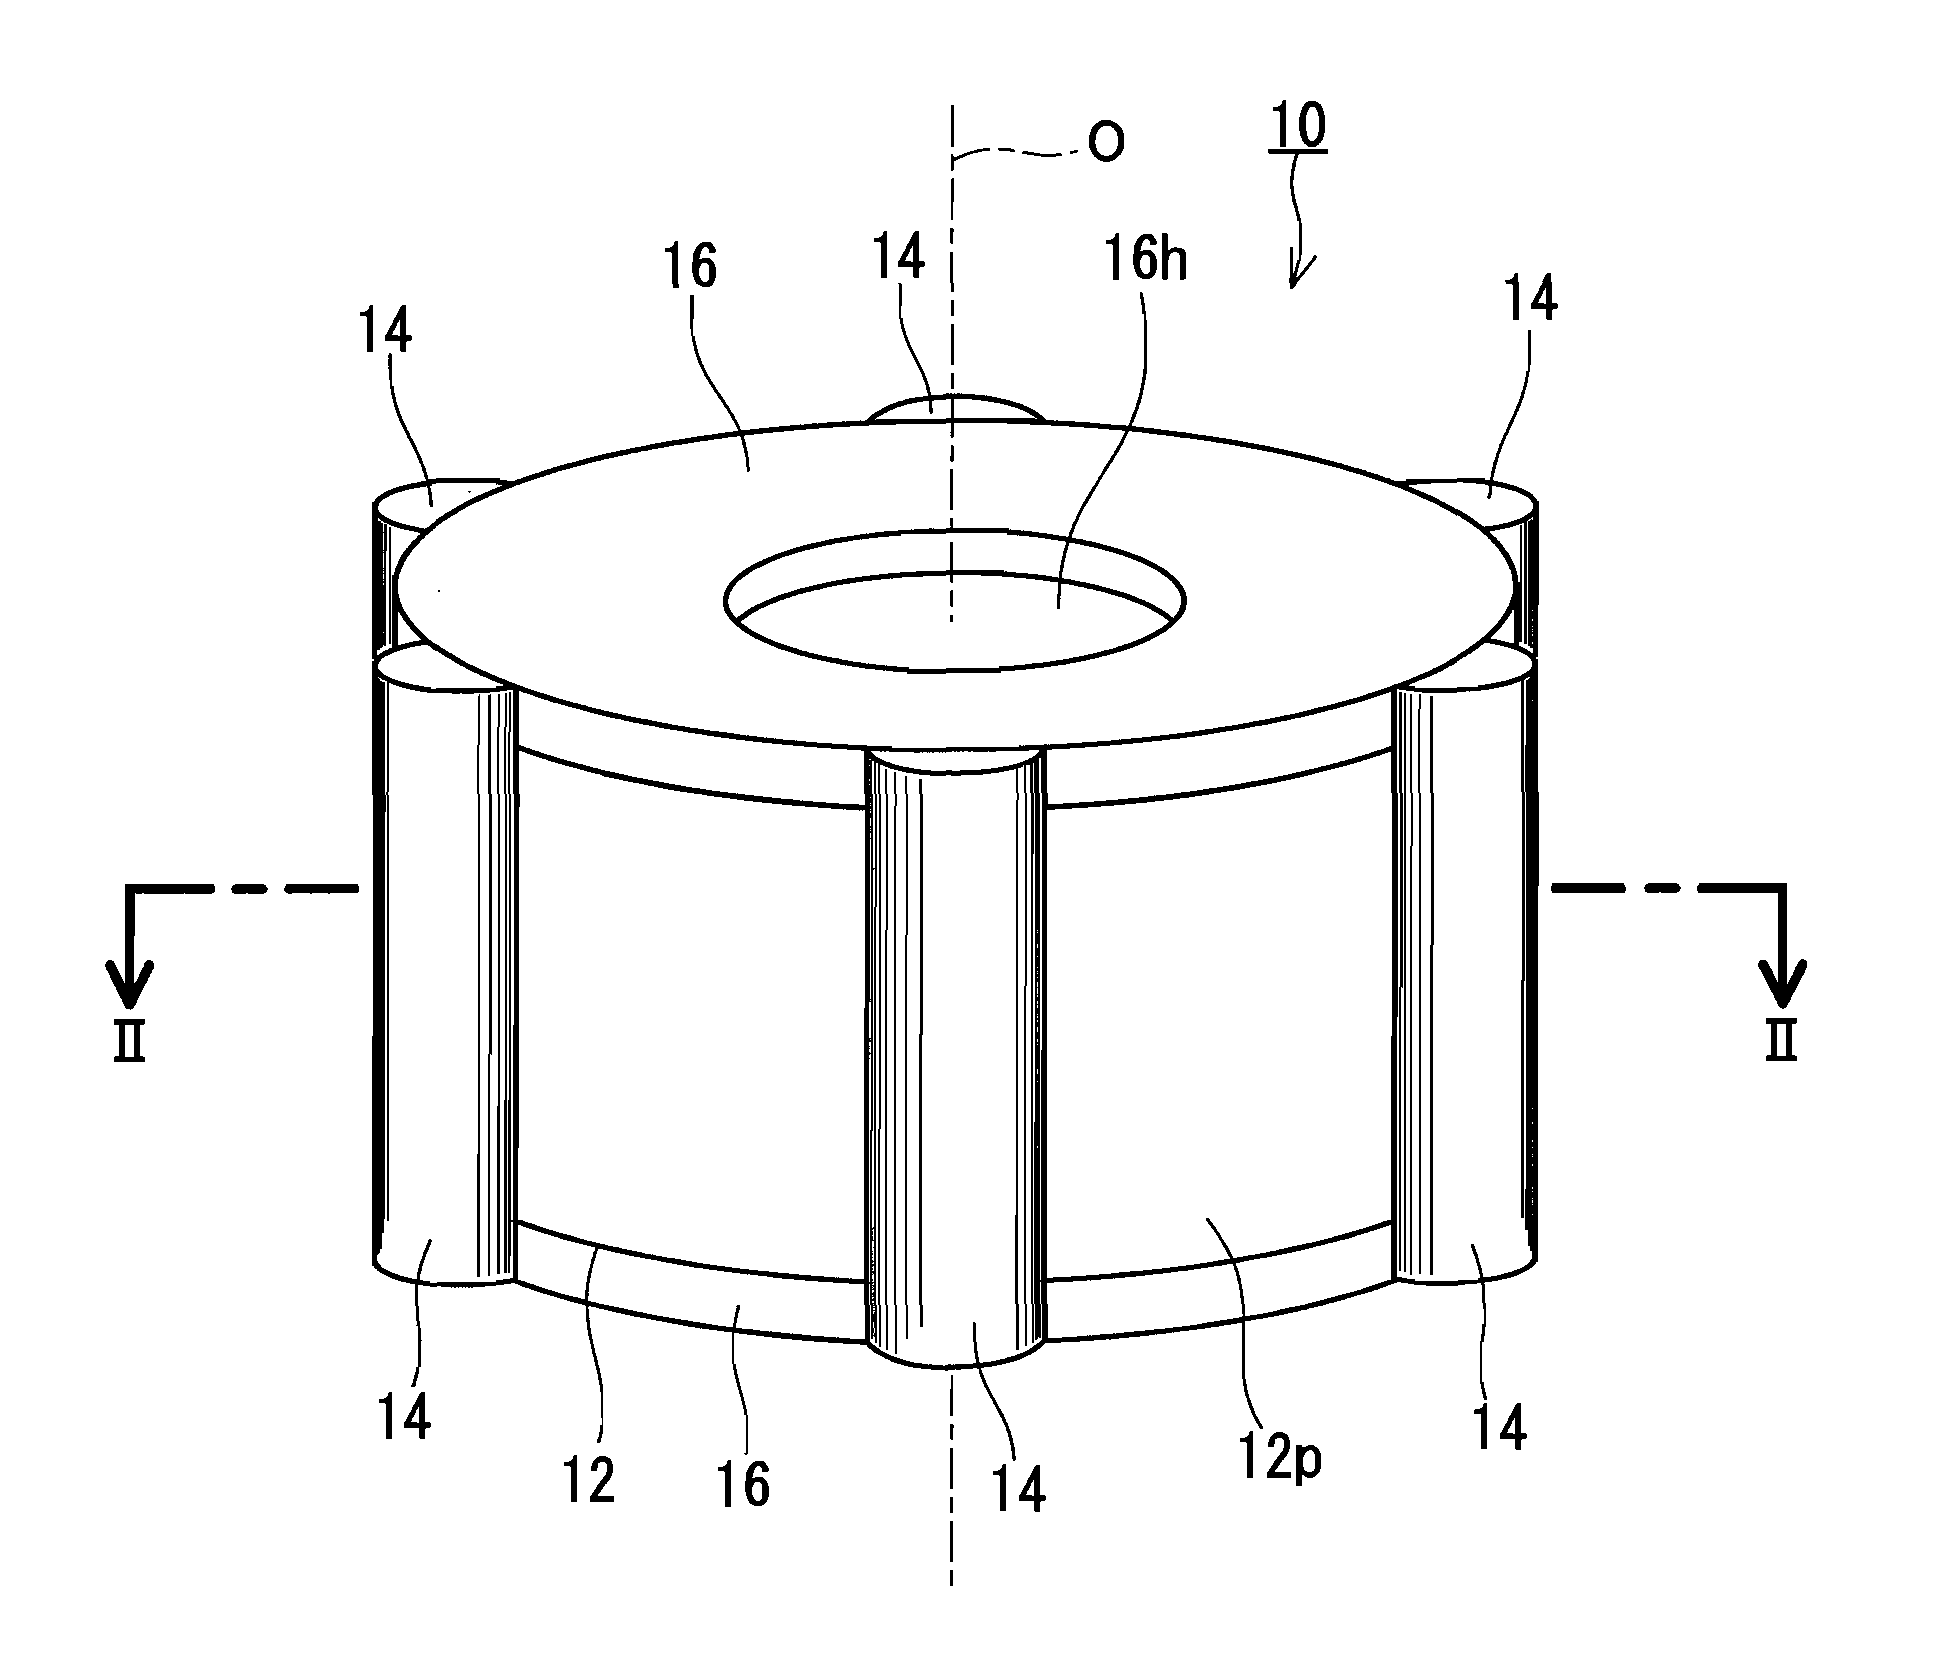 Film winding core, and wound film body using same